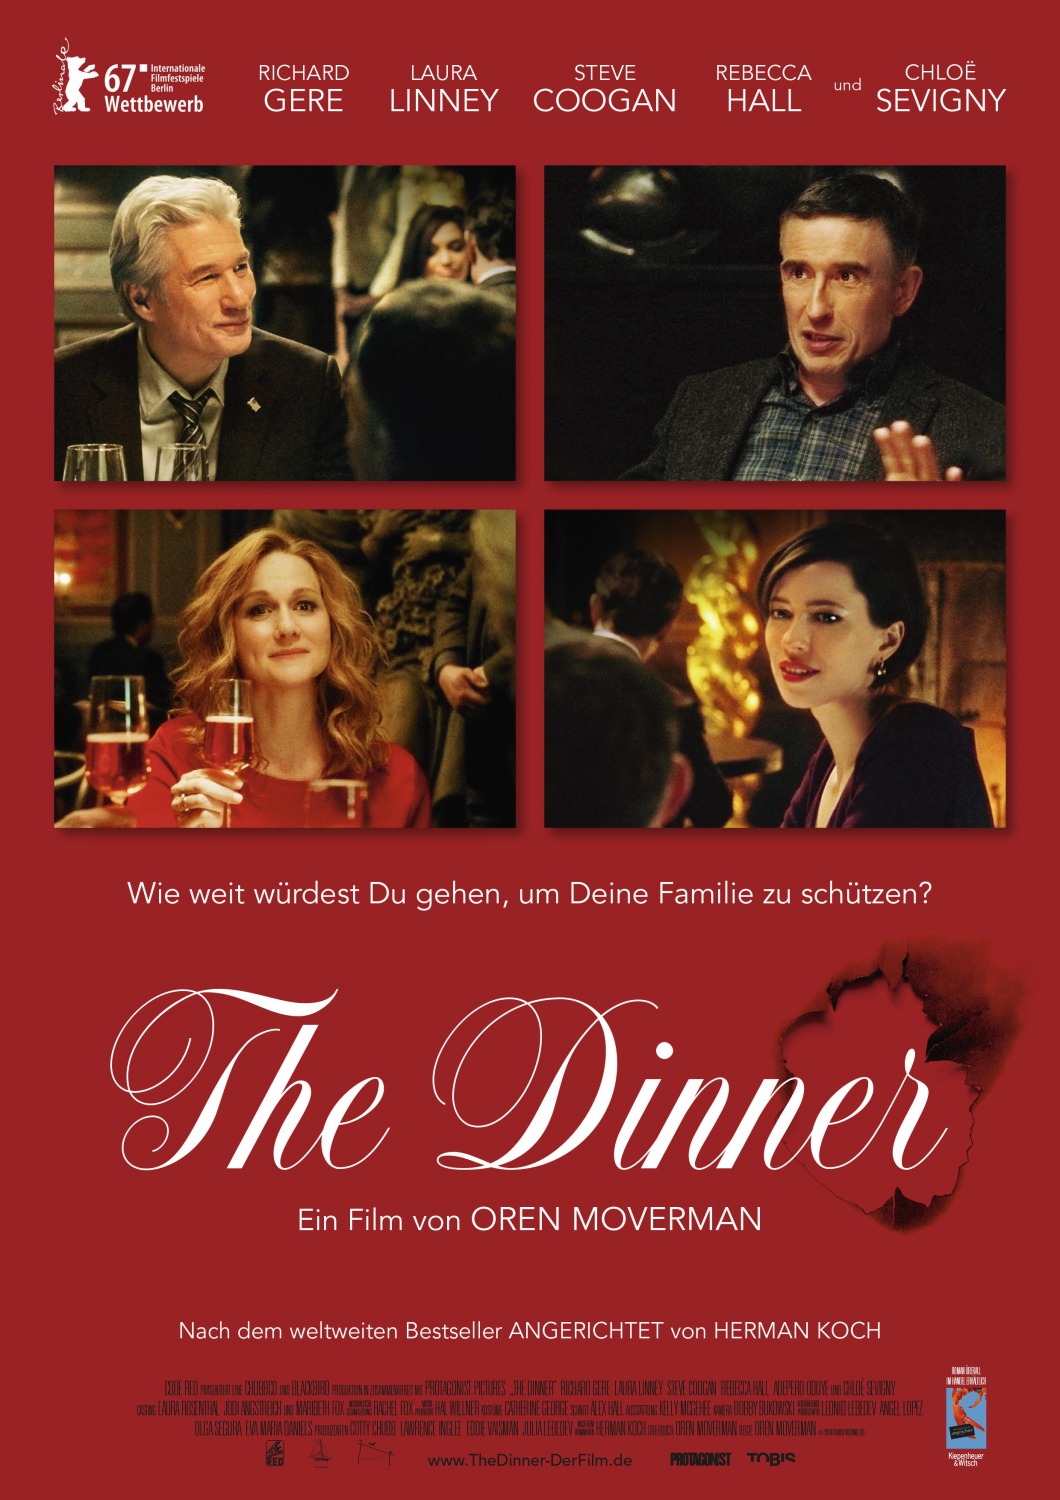 THE DINNER (2017) Trailer, Clip, Images and Poster | The Entertainment